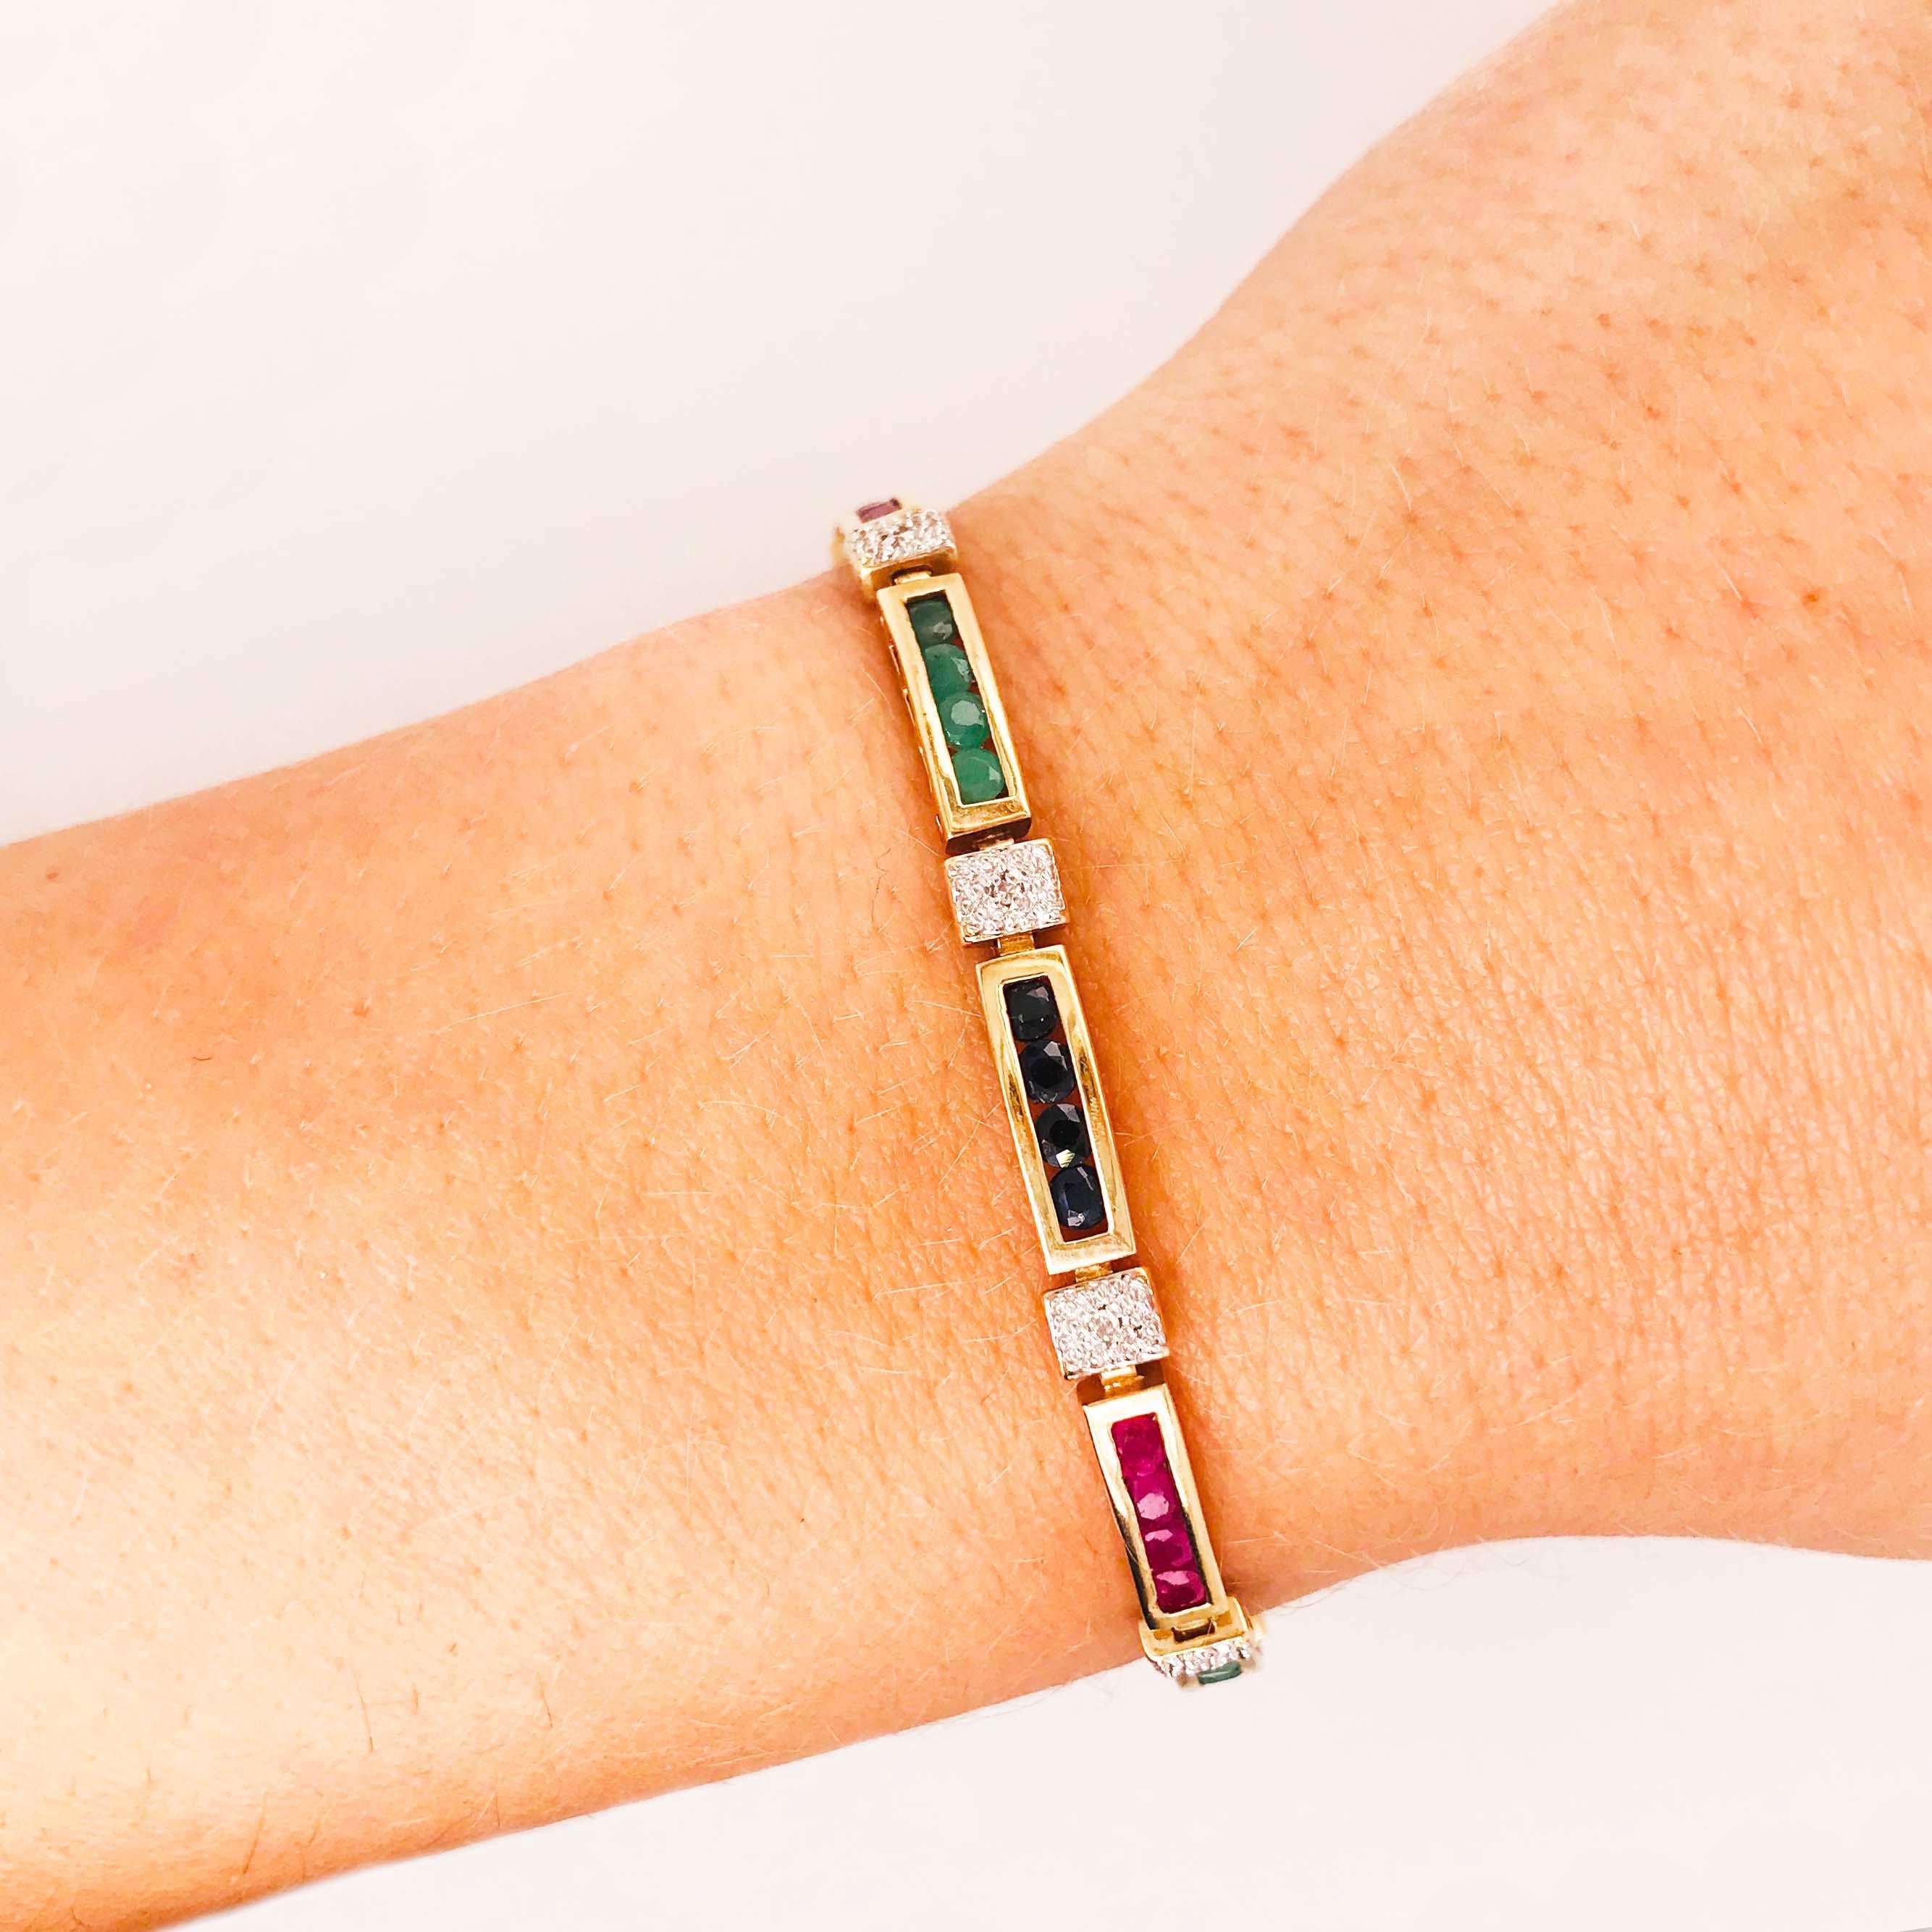 A geometrical sapphire, ruby, and emerald bracelet makes a nice addition to any wrist or layered bracelets!  Set in 14 karat yellow gold, this bracelet is constructed nicely with the genuine, authentic gemstones set in a channel with diamonds